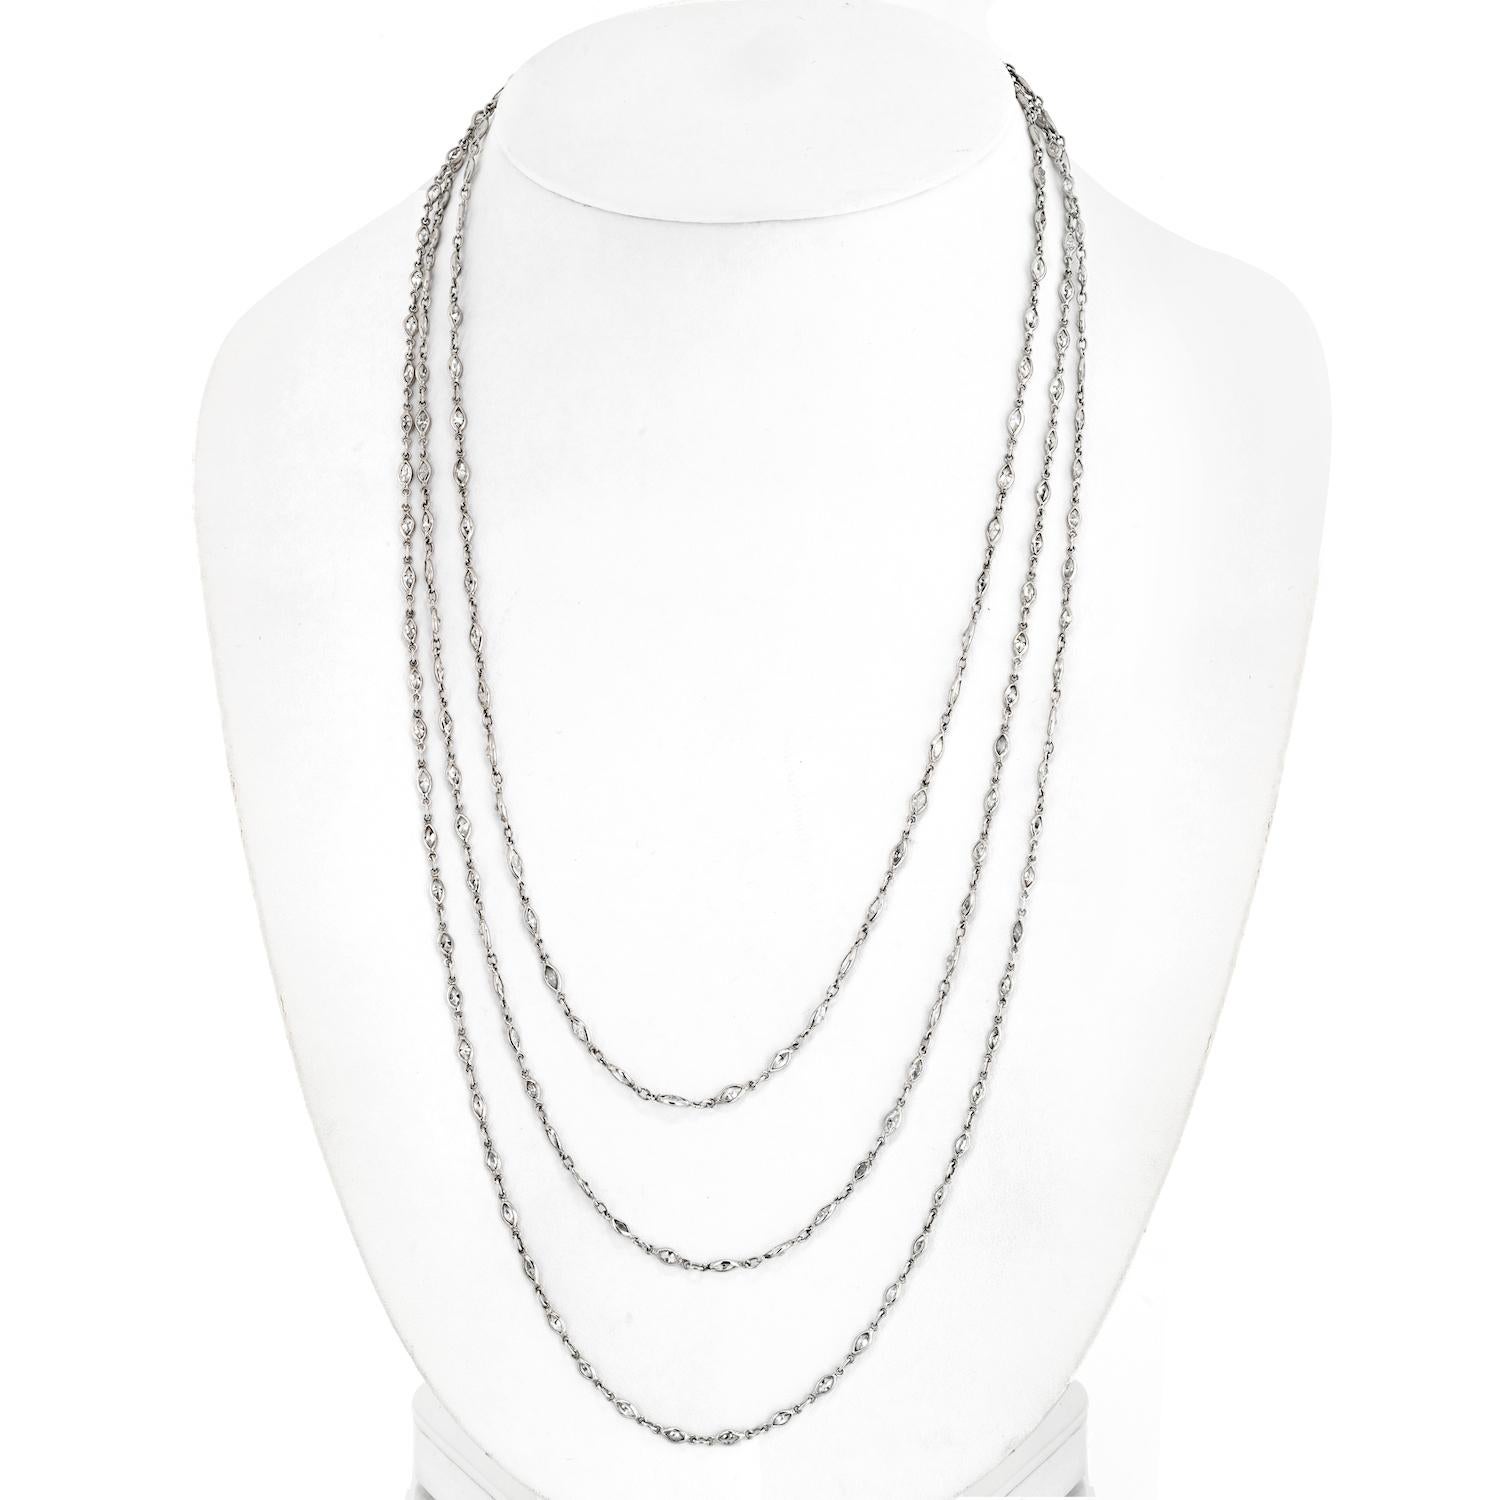 Elevate your jewelry collection to new heights with this exquisite Platinum Marquise Cut Diamond By The Yard Necklace, boasting an impressive total carat weight of 29.50 carats. This necklace is the epitome of luxury and sophistication, designed to